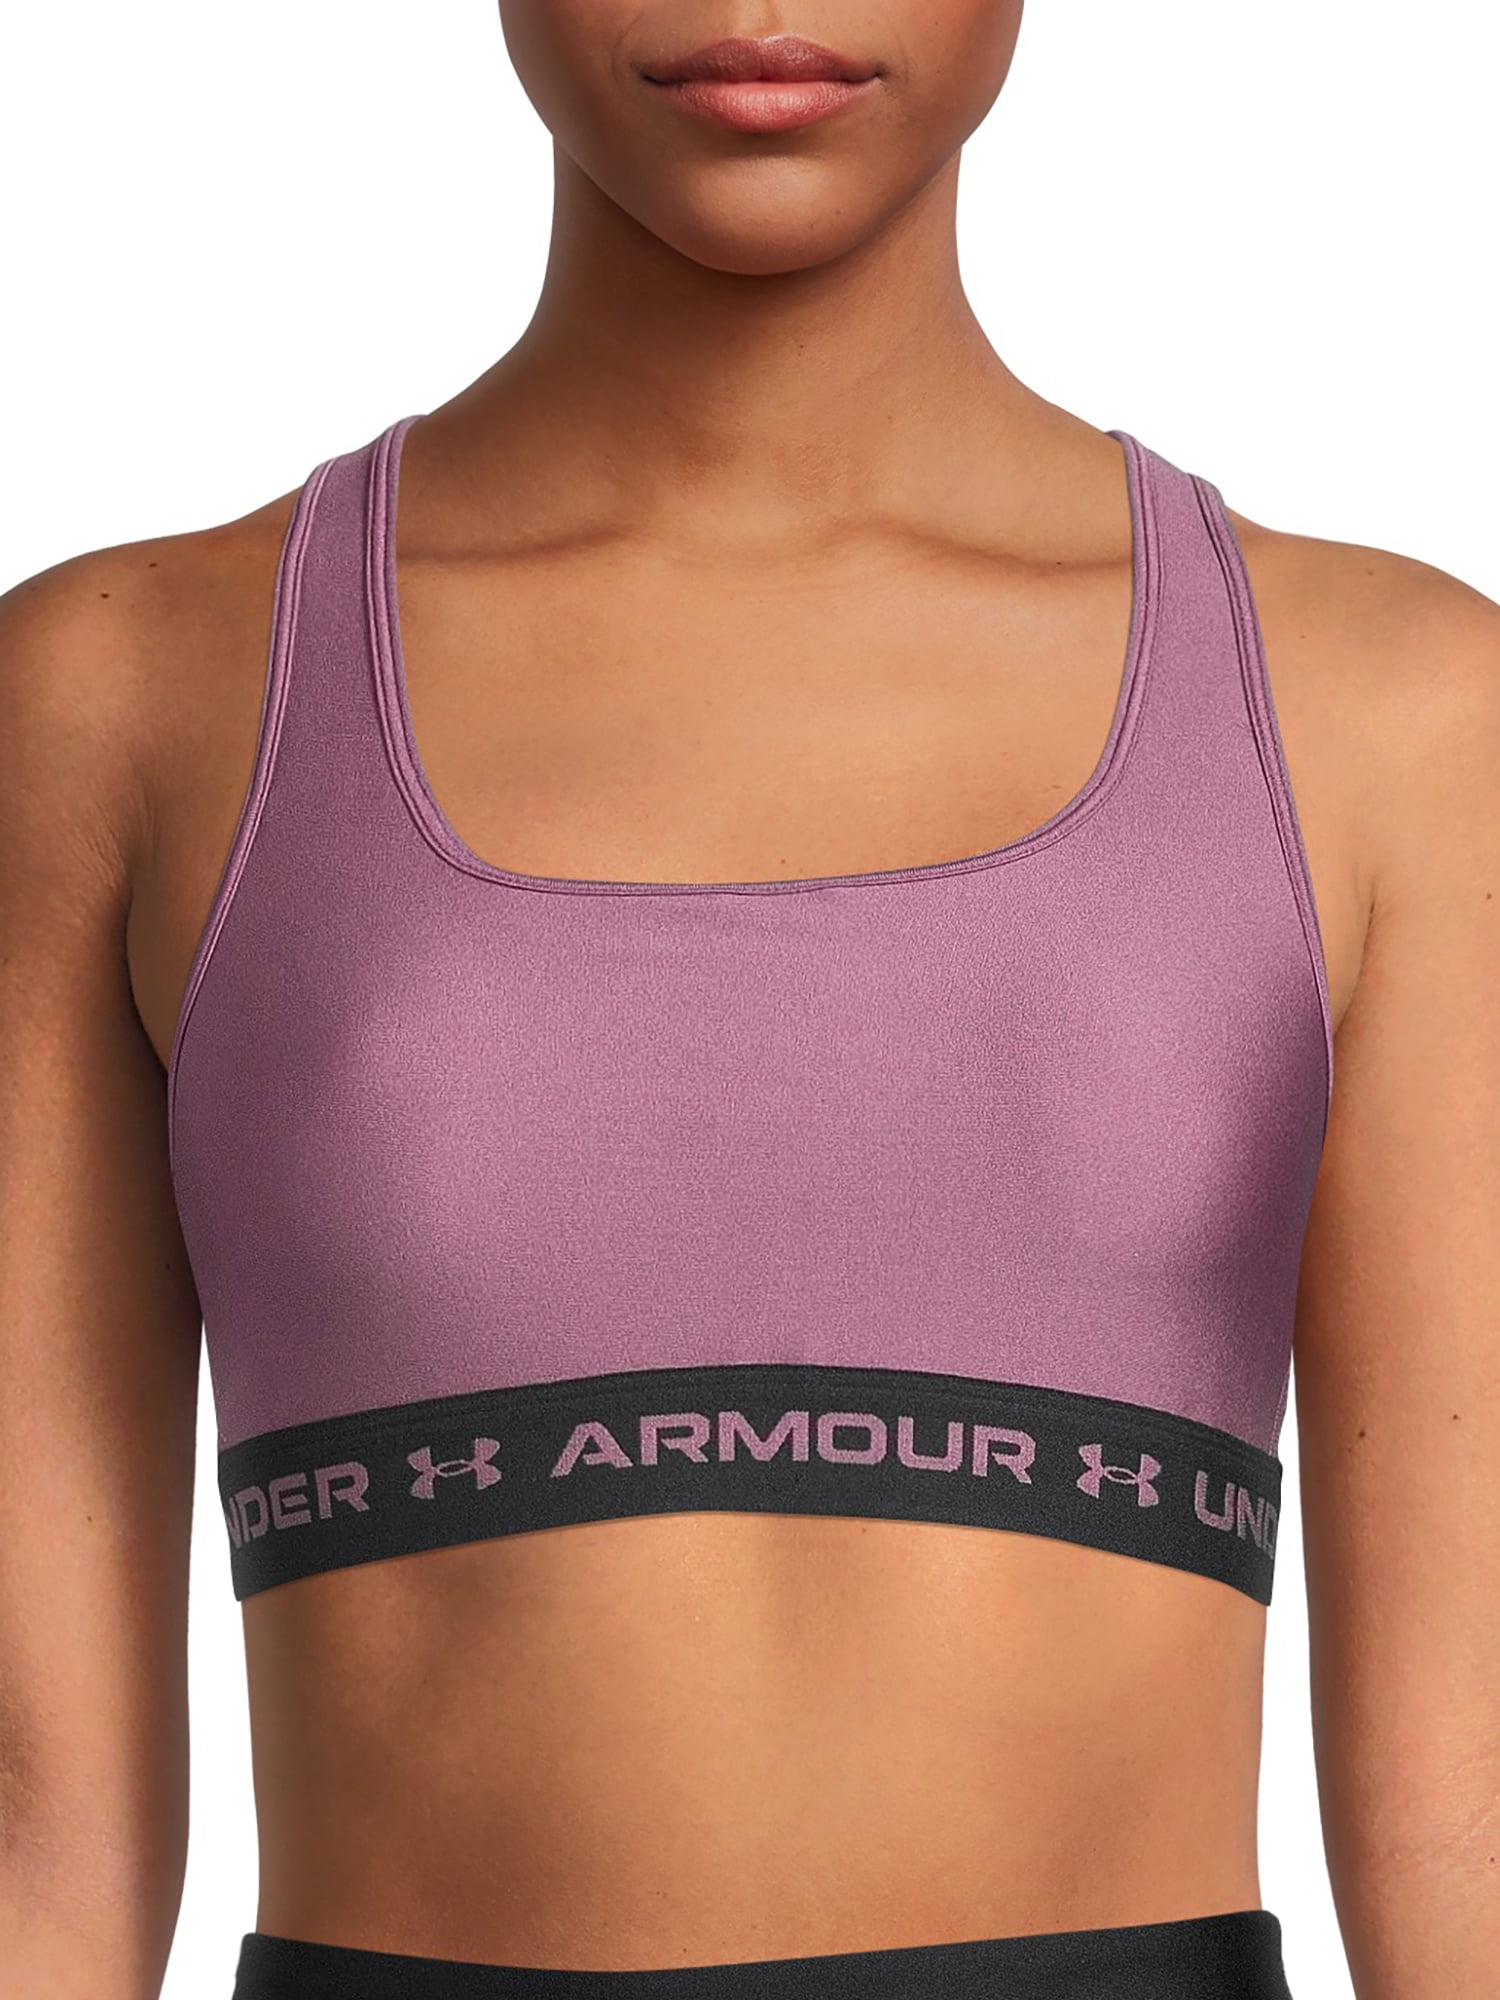 Under Armour Women's Bra with Cross-Back Sports Bras (Pack of 1